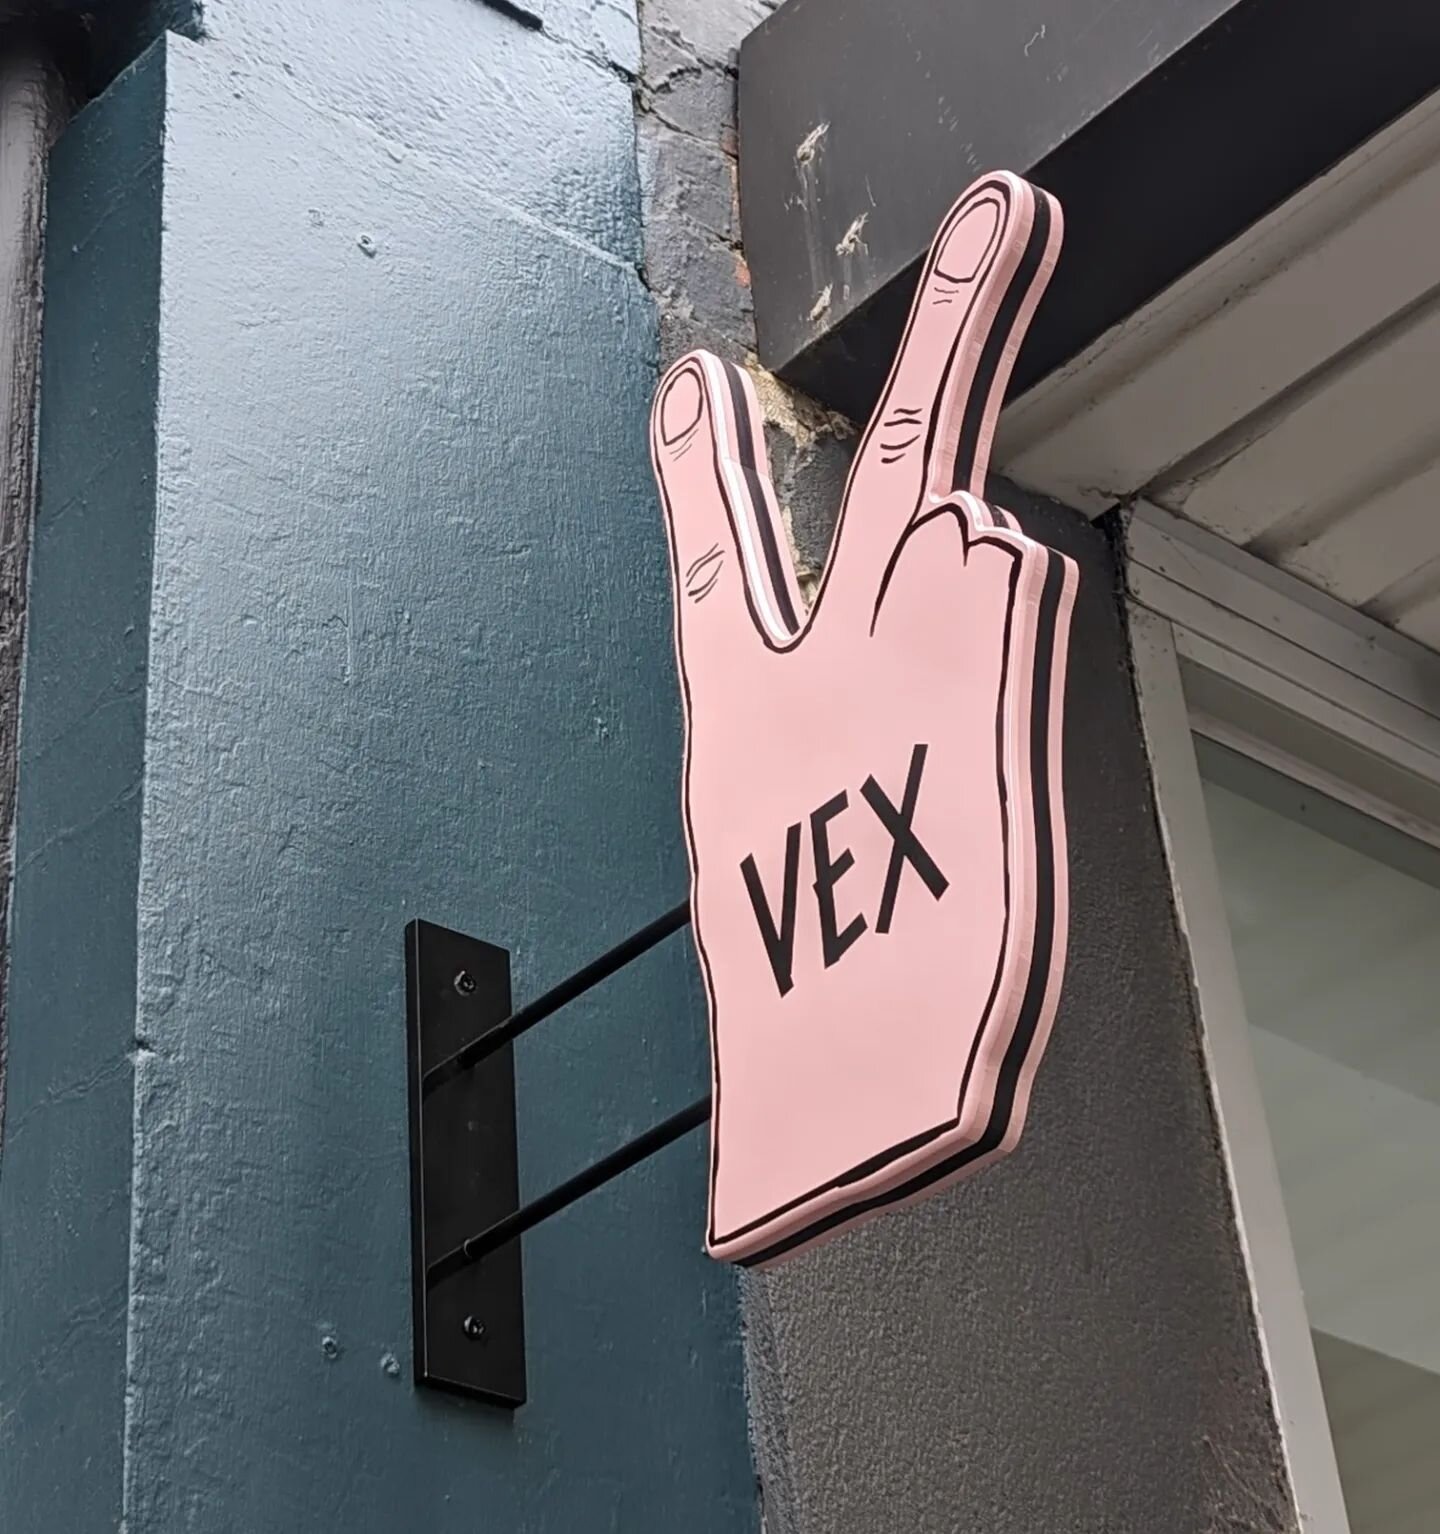 Few hand crafted signs for @we_are_vex in Westgarth with some fine details. 

Love this little blade sign! Thanks for letting us do what we do guys.

#sigmwriting #signwriter #signpainting #signmaking #signs #3dsigns #bladesign #hangingsign #raisedle